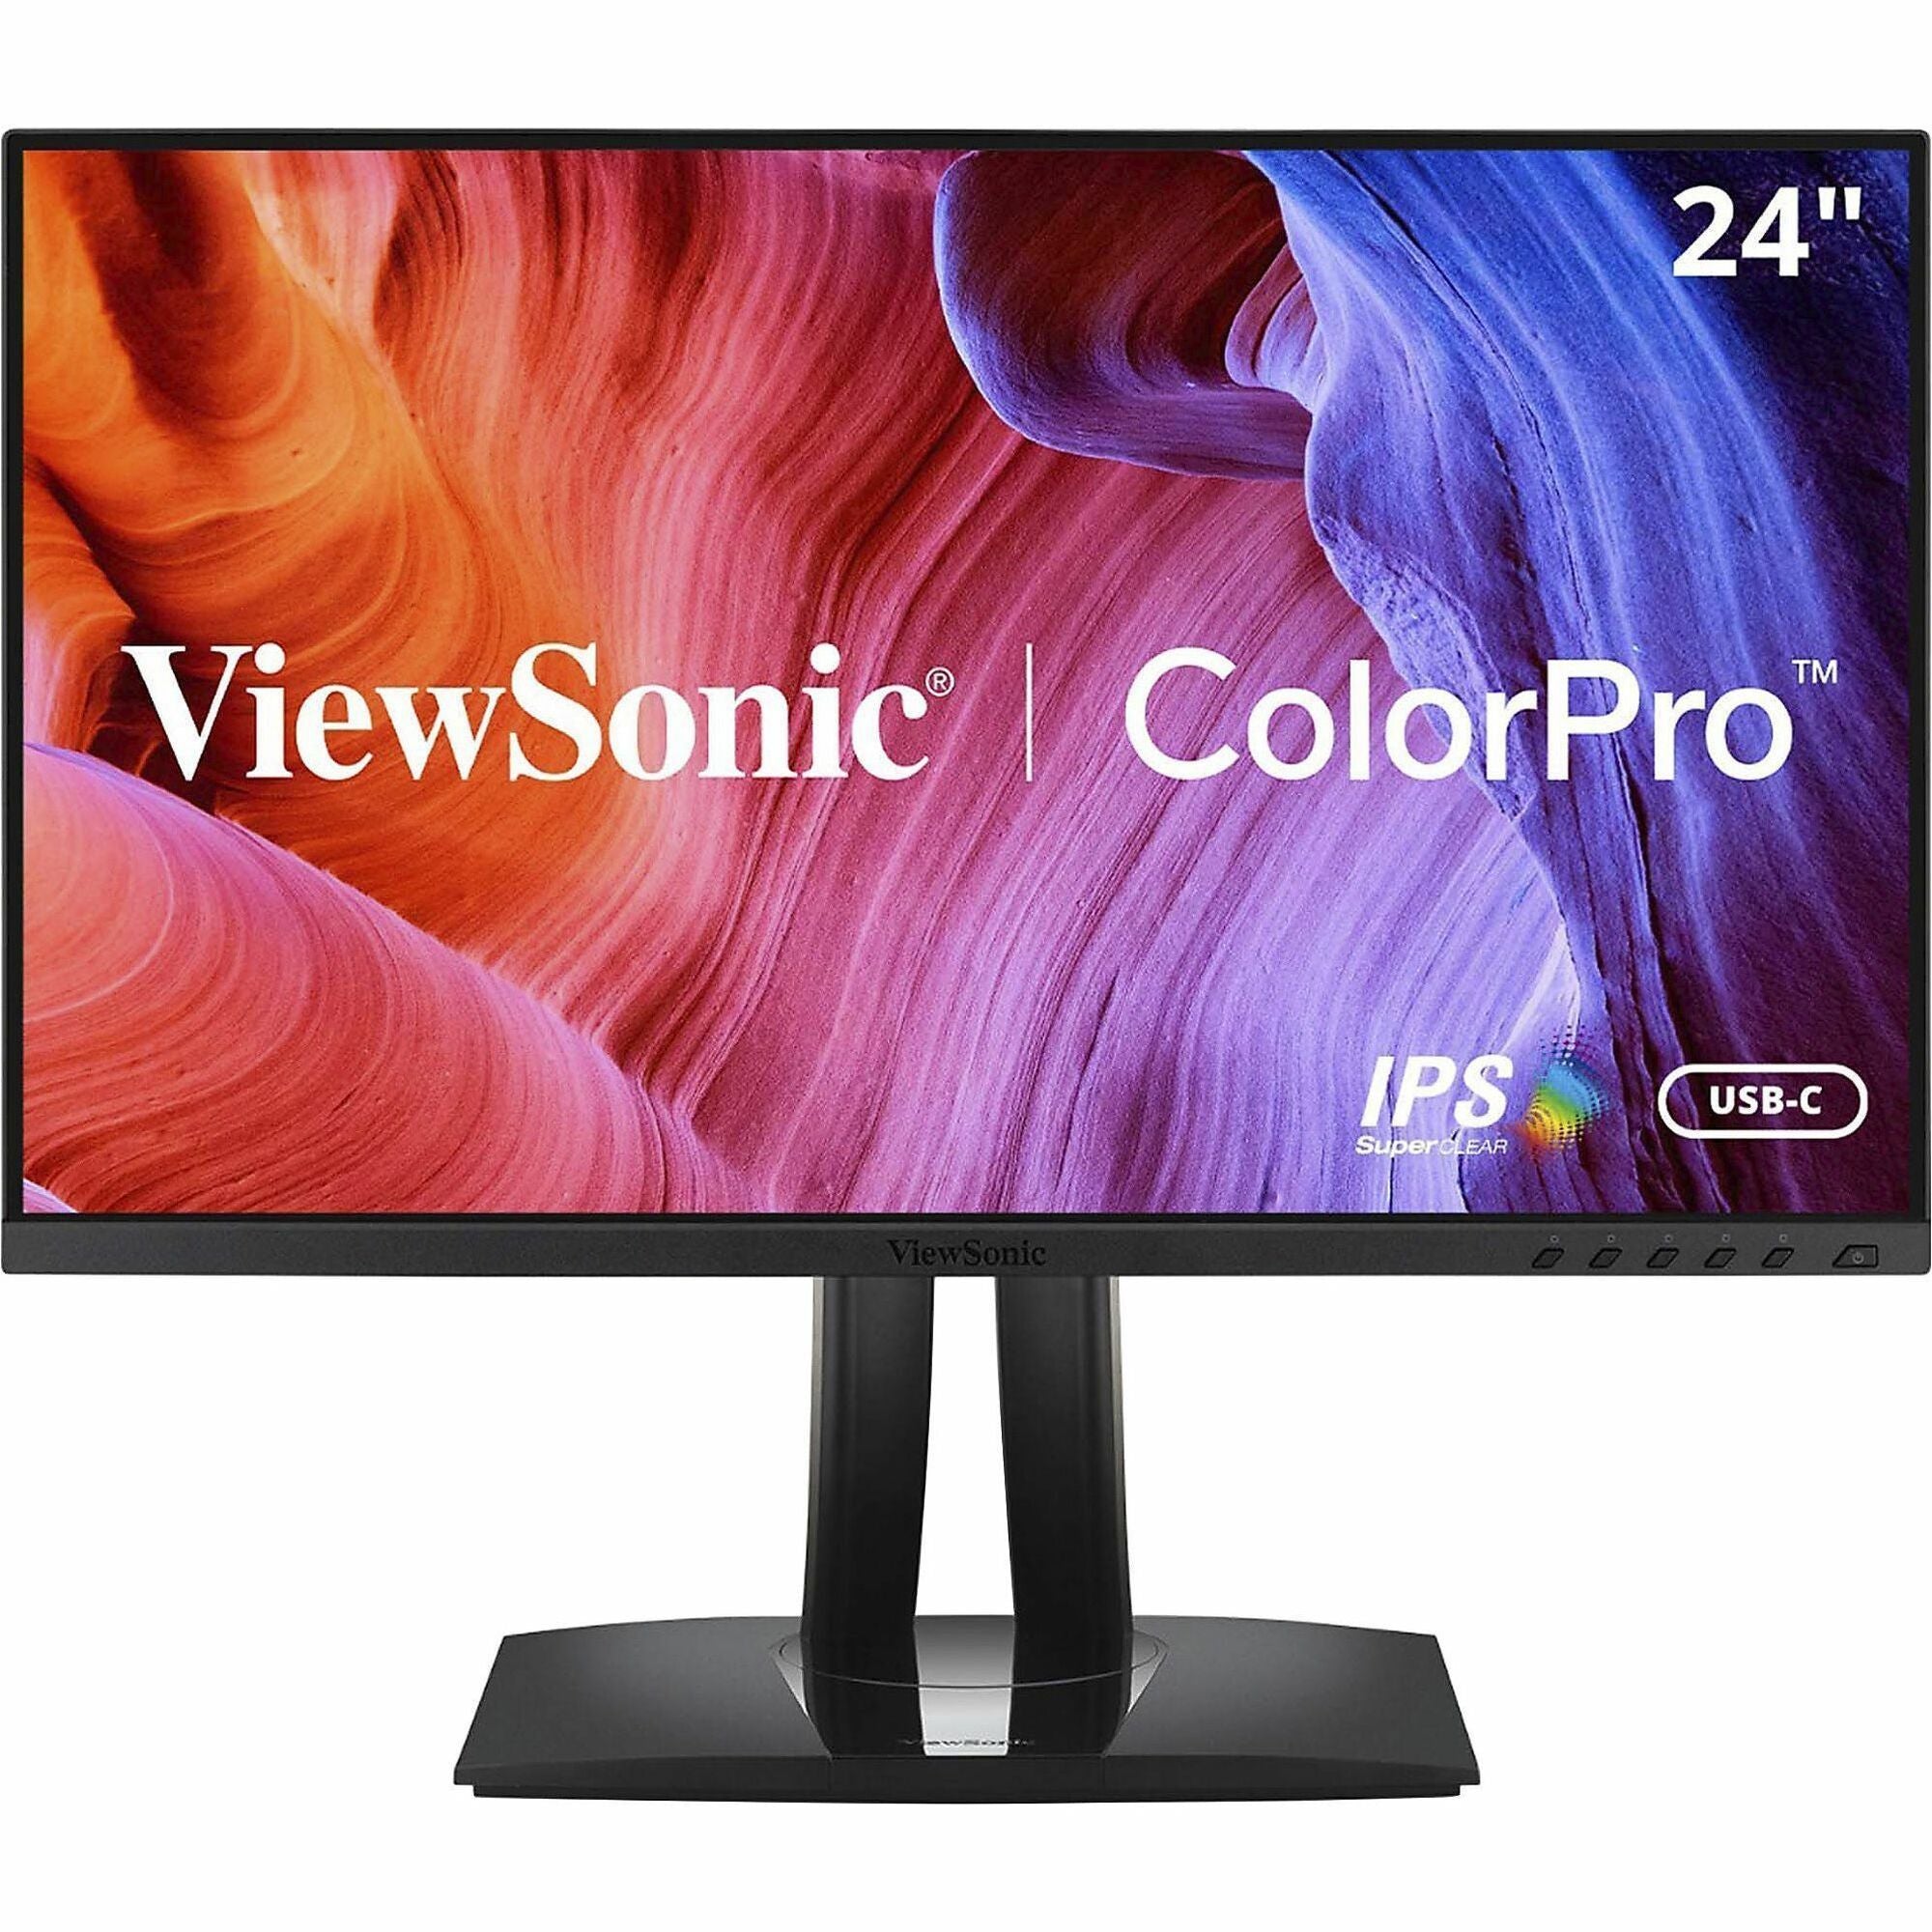 ViewSonic VP2456 24 Inch 1080p Premium IPS Monitor with Ultra-Thin Bezels, Color Accuracy, Pantone Validated, HDMI, DisplayPort and USB C for Professional Home and Office - ColorPro VP2456 - 1080p Ergonomic IPS Monitor with Pantone Validated, USB-C, - 1